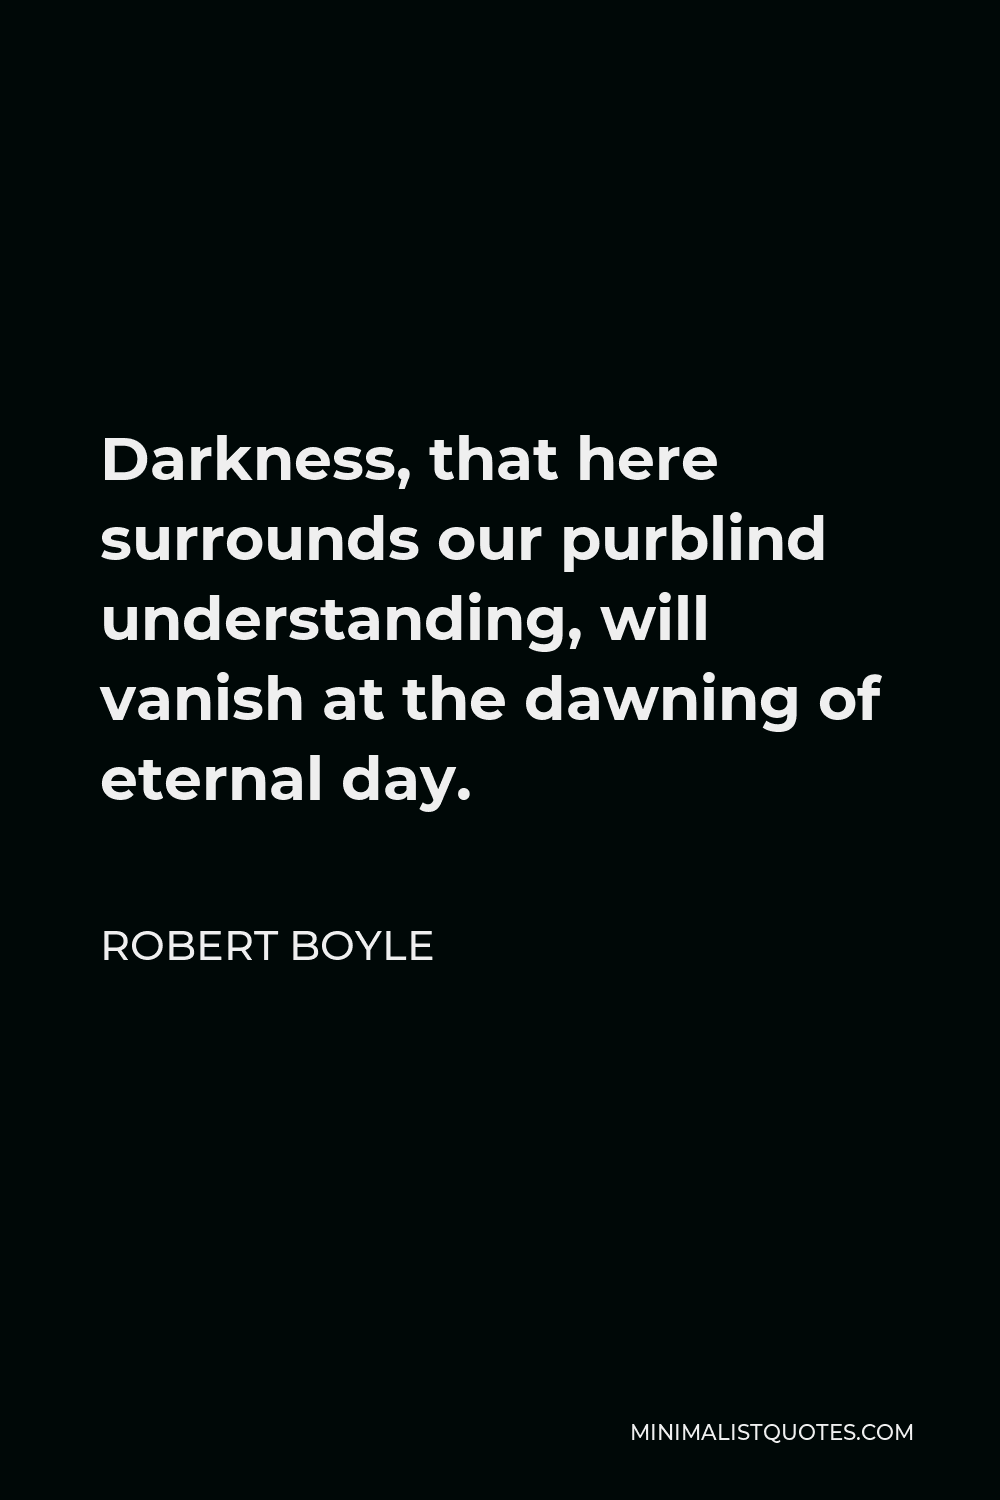 Robert Boyle Quote - Darkness, that here surrounds our purblind understanding, will vanish at the dawning of eternal day.